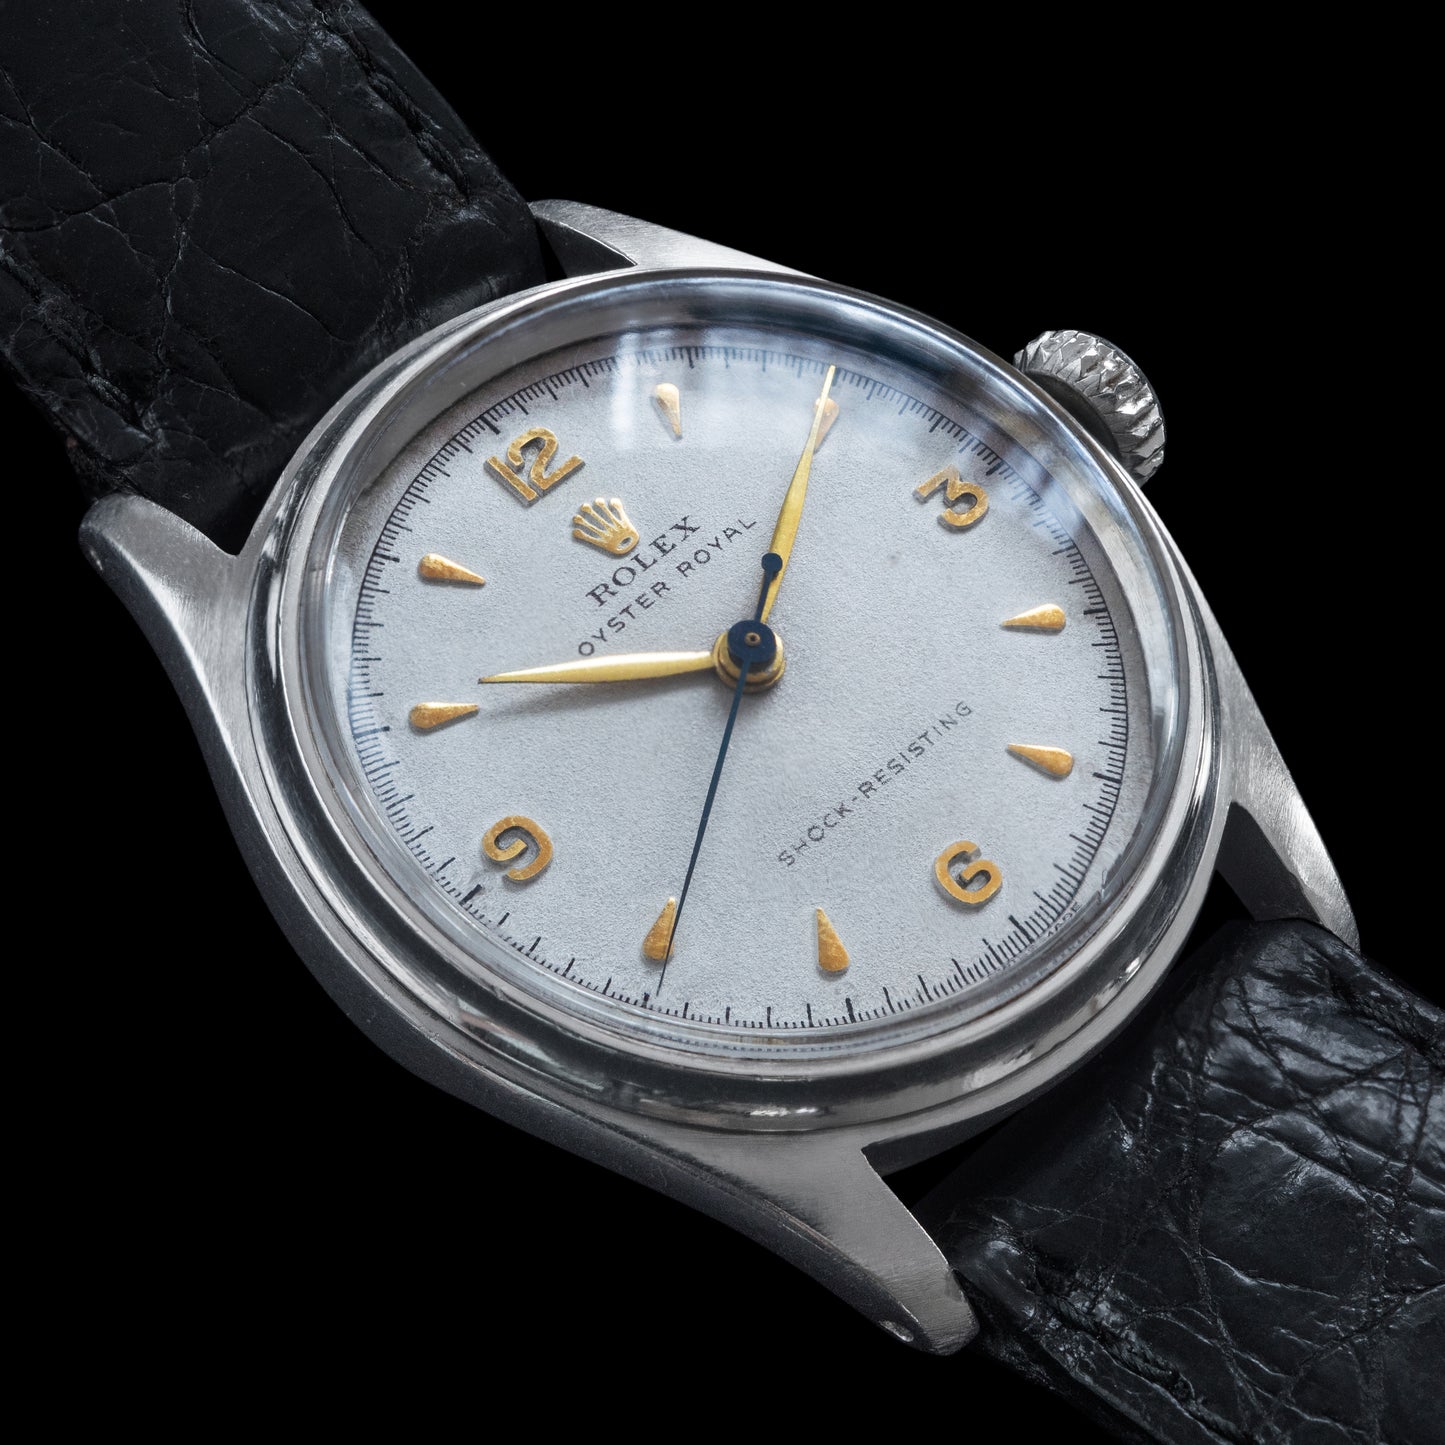 No. 444 / Rolex Oyster Royal 6044 - 1950